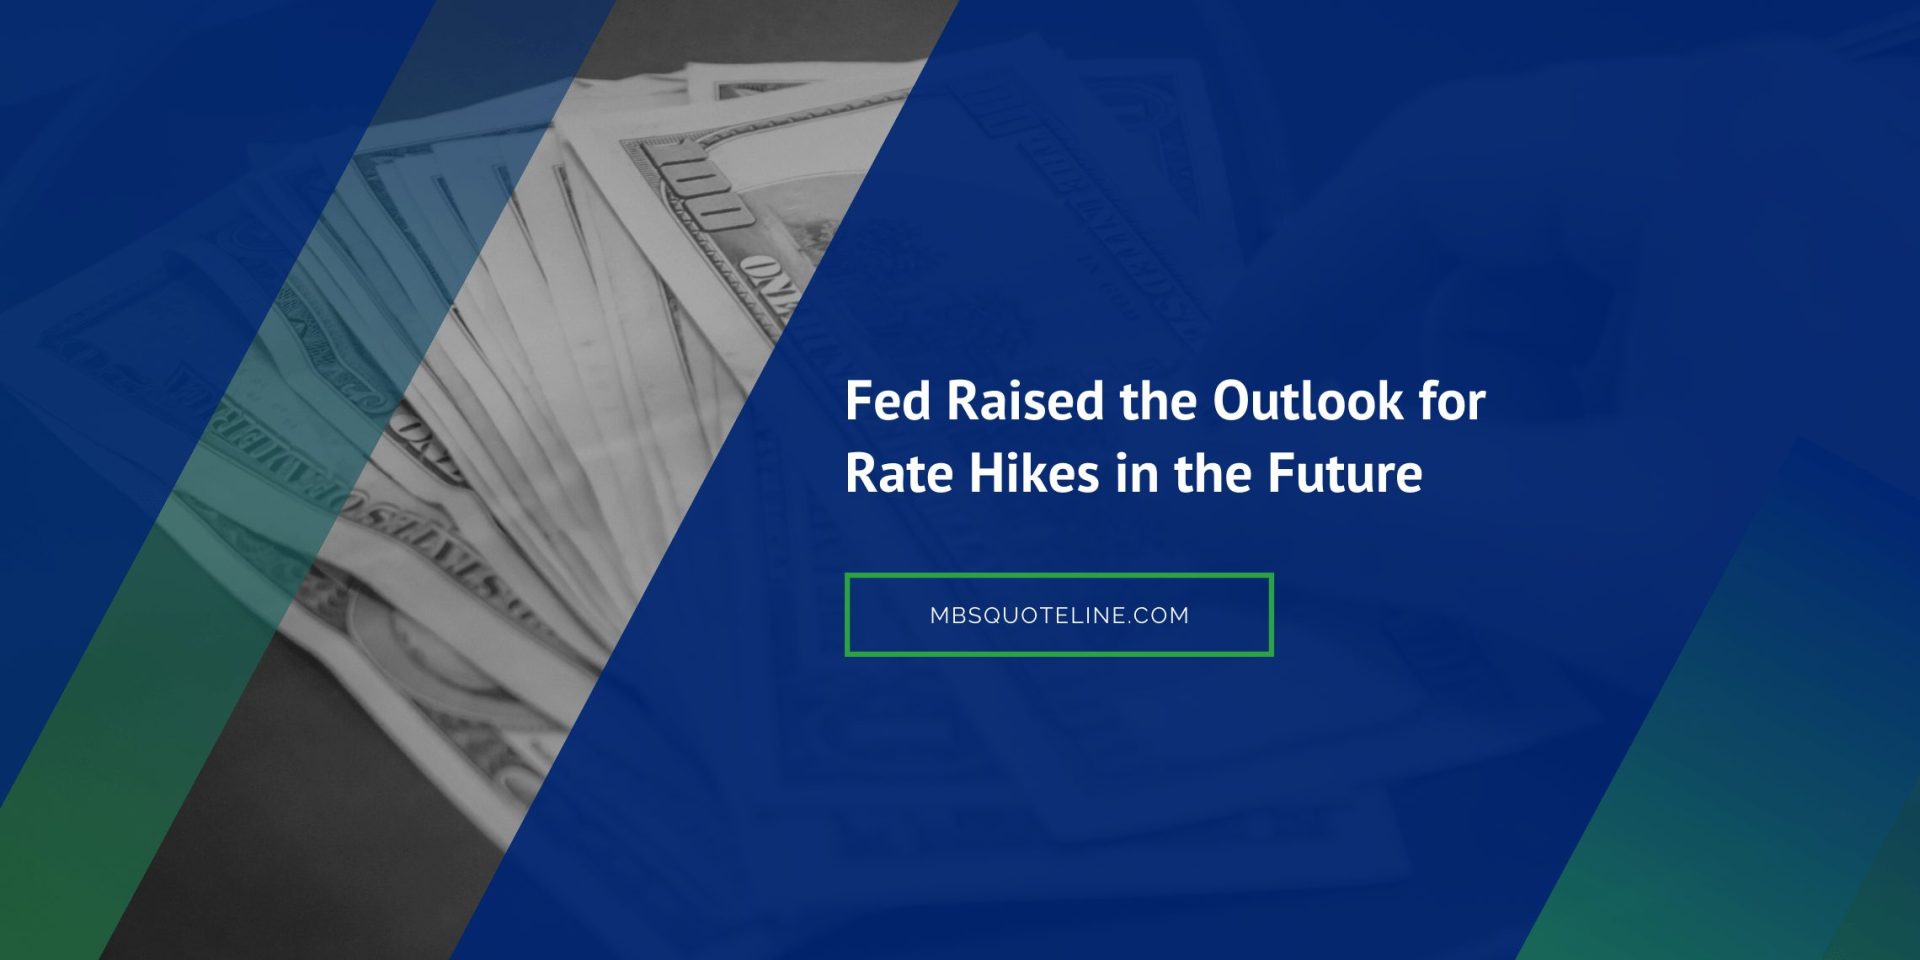 fed raised the outlook for rate hikes in the future news mbsquoteline